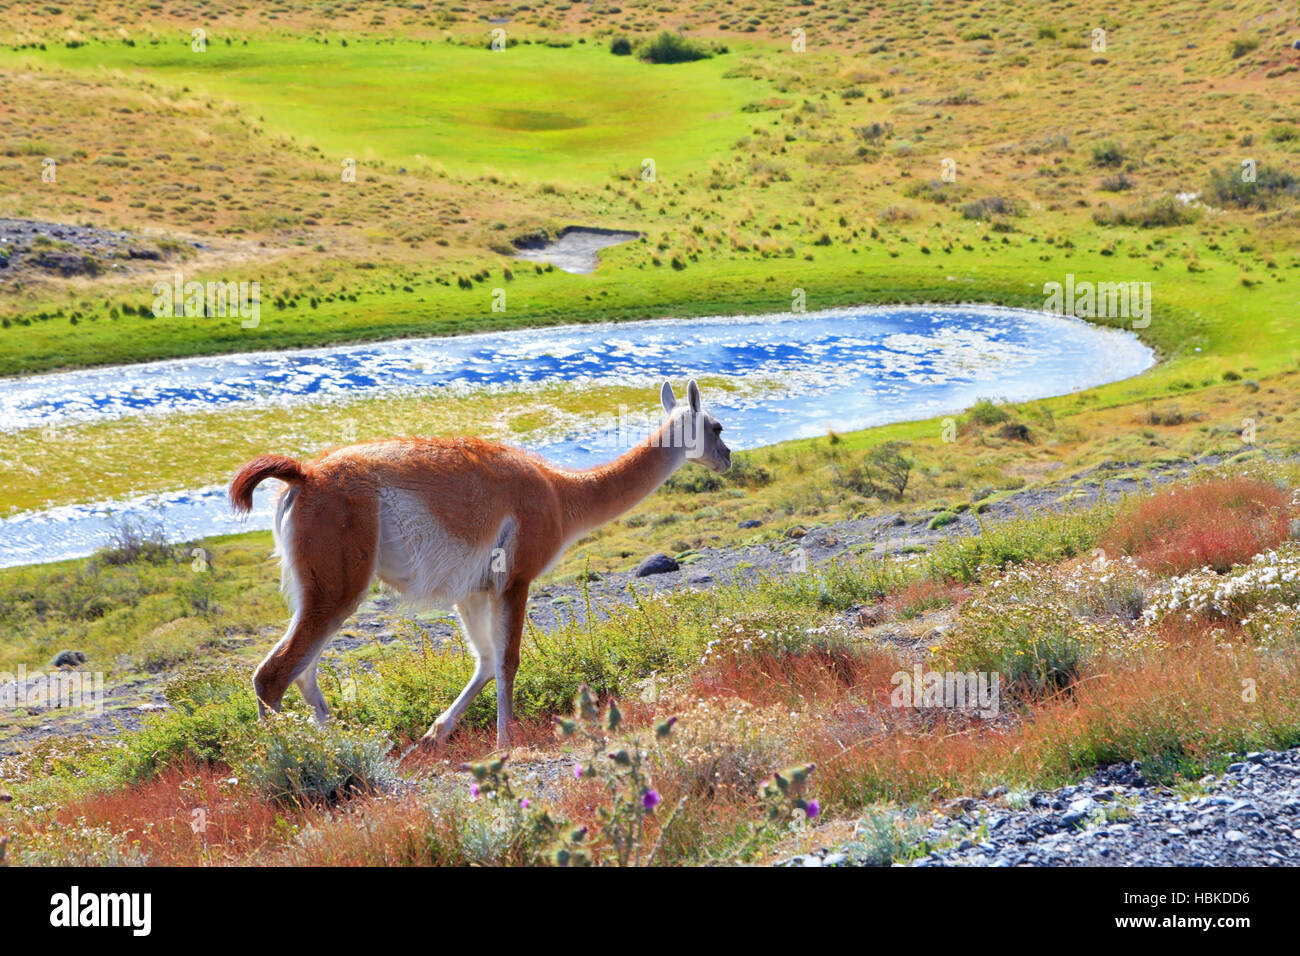 The charming vicuna on the shore Stock Photo